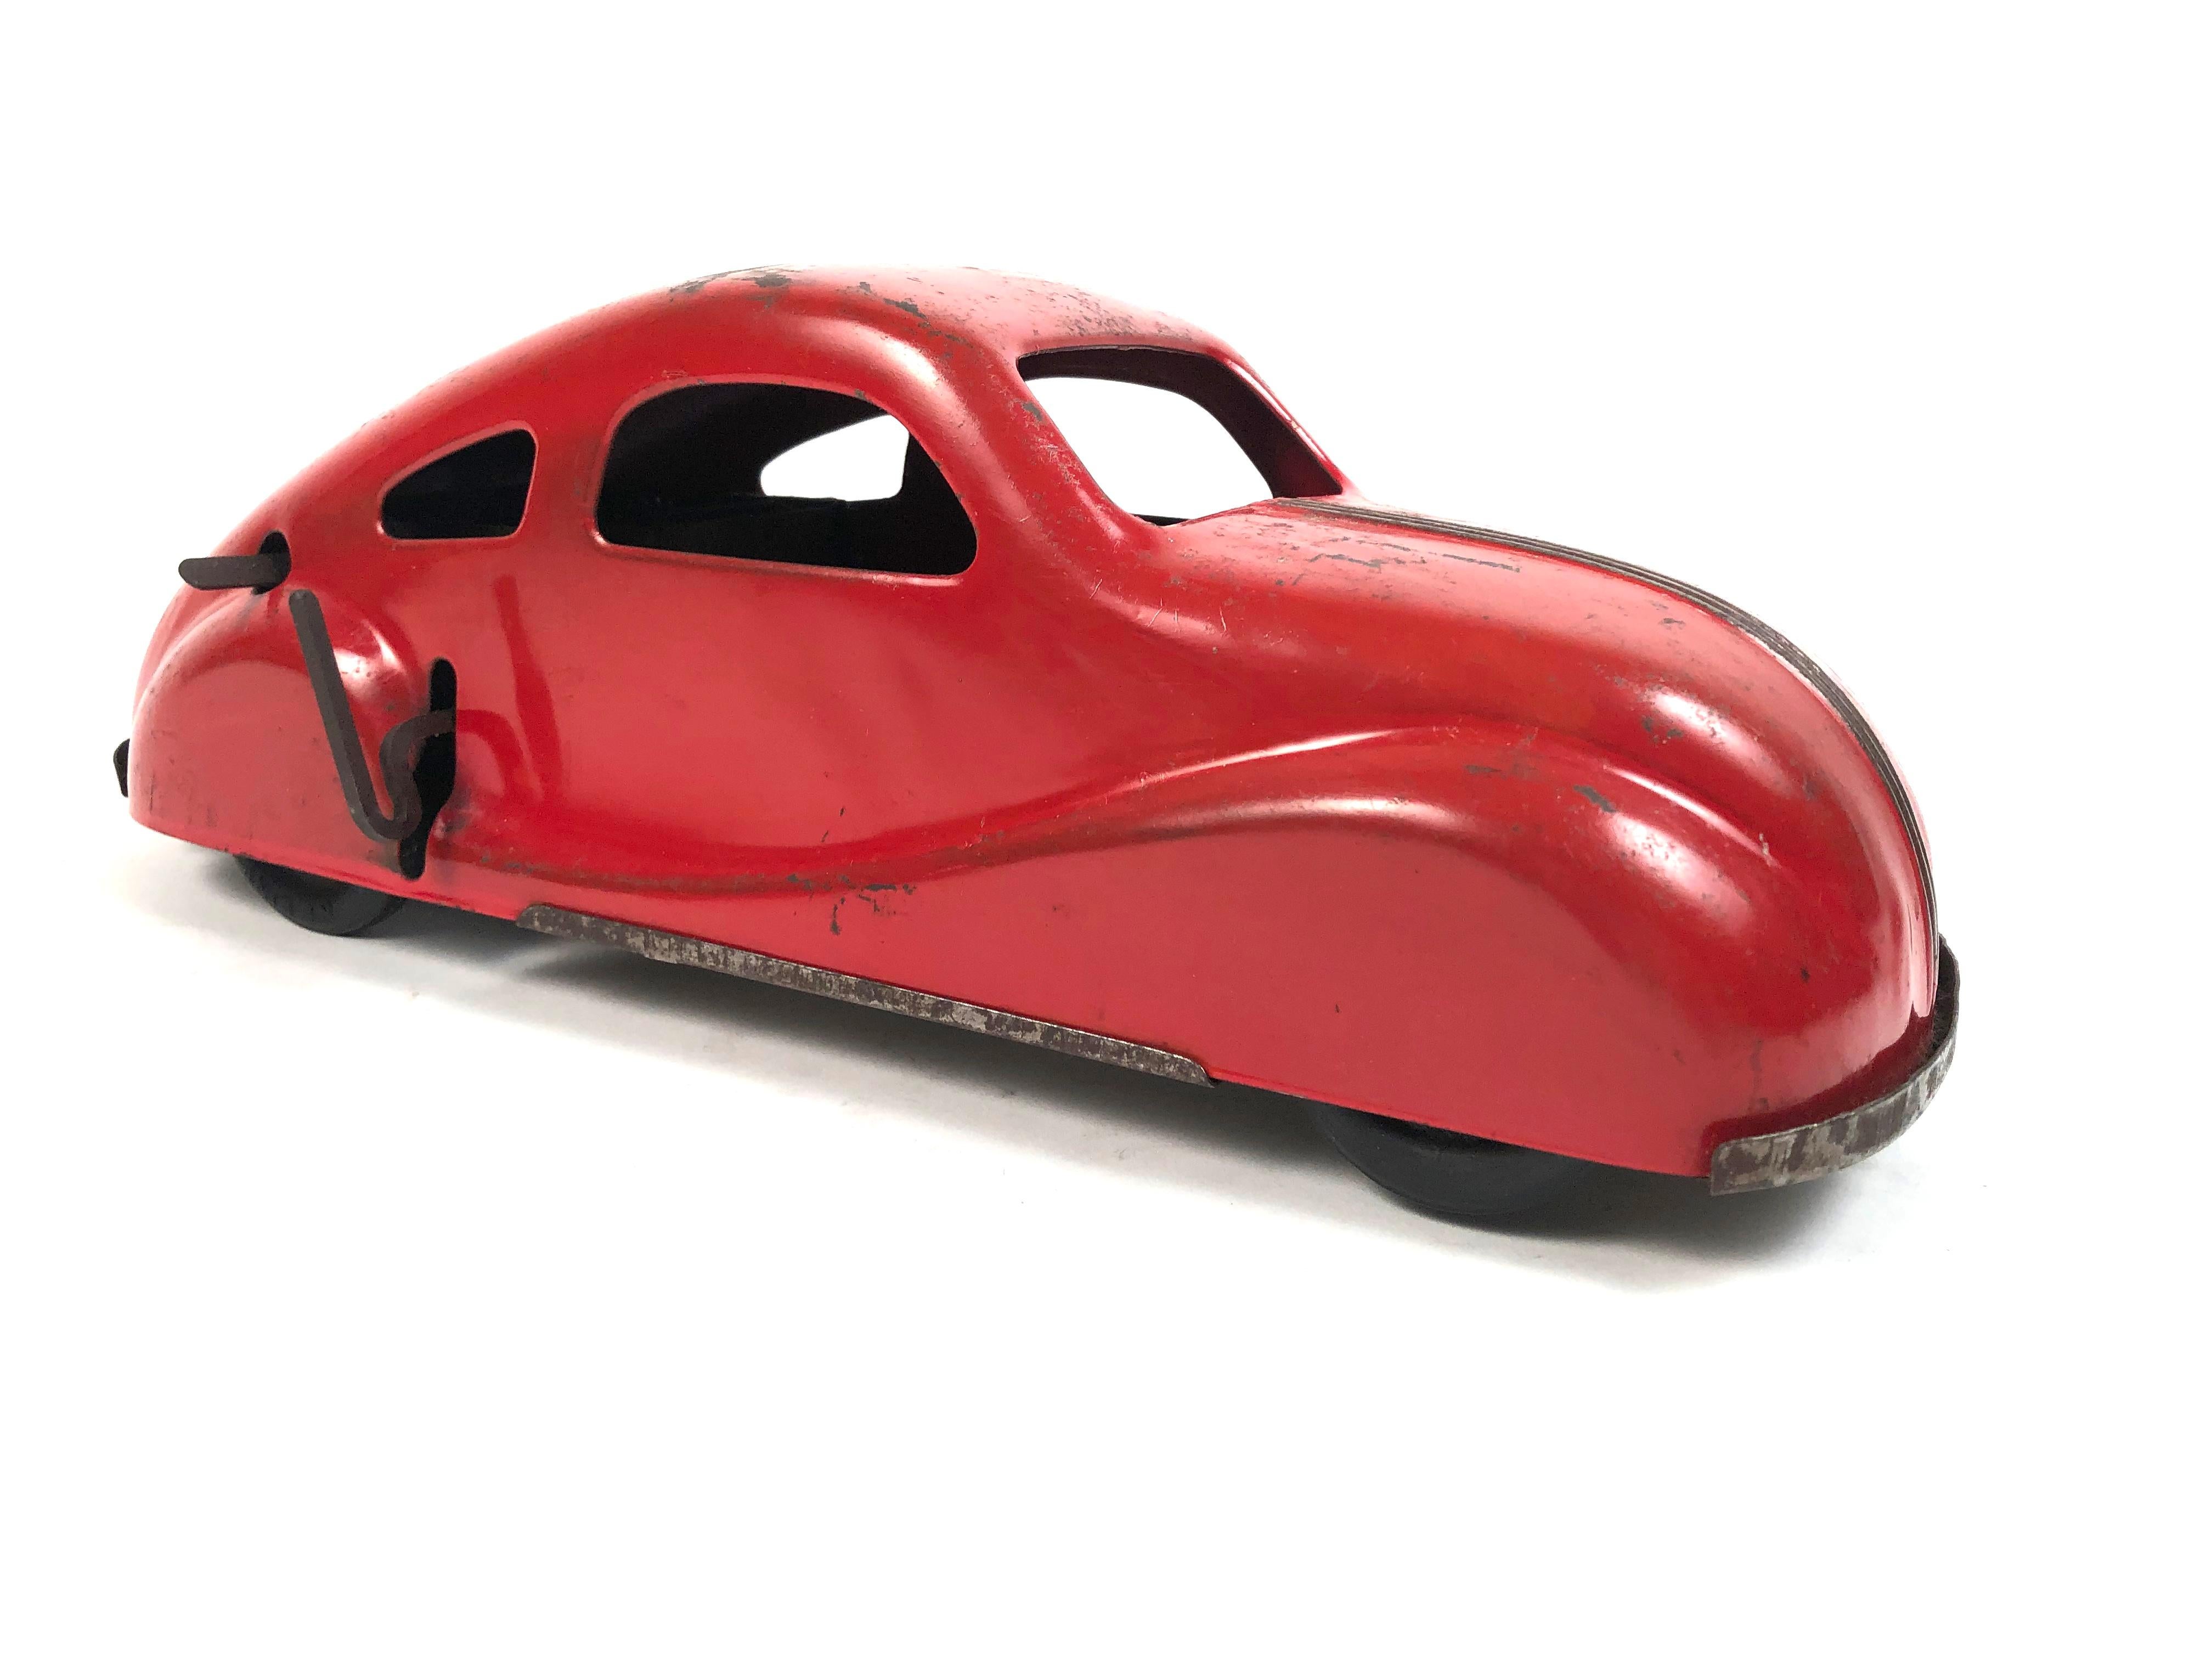 1930s toy cars